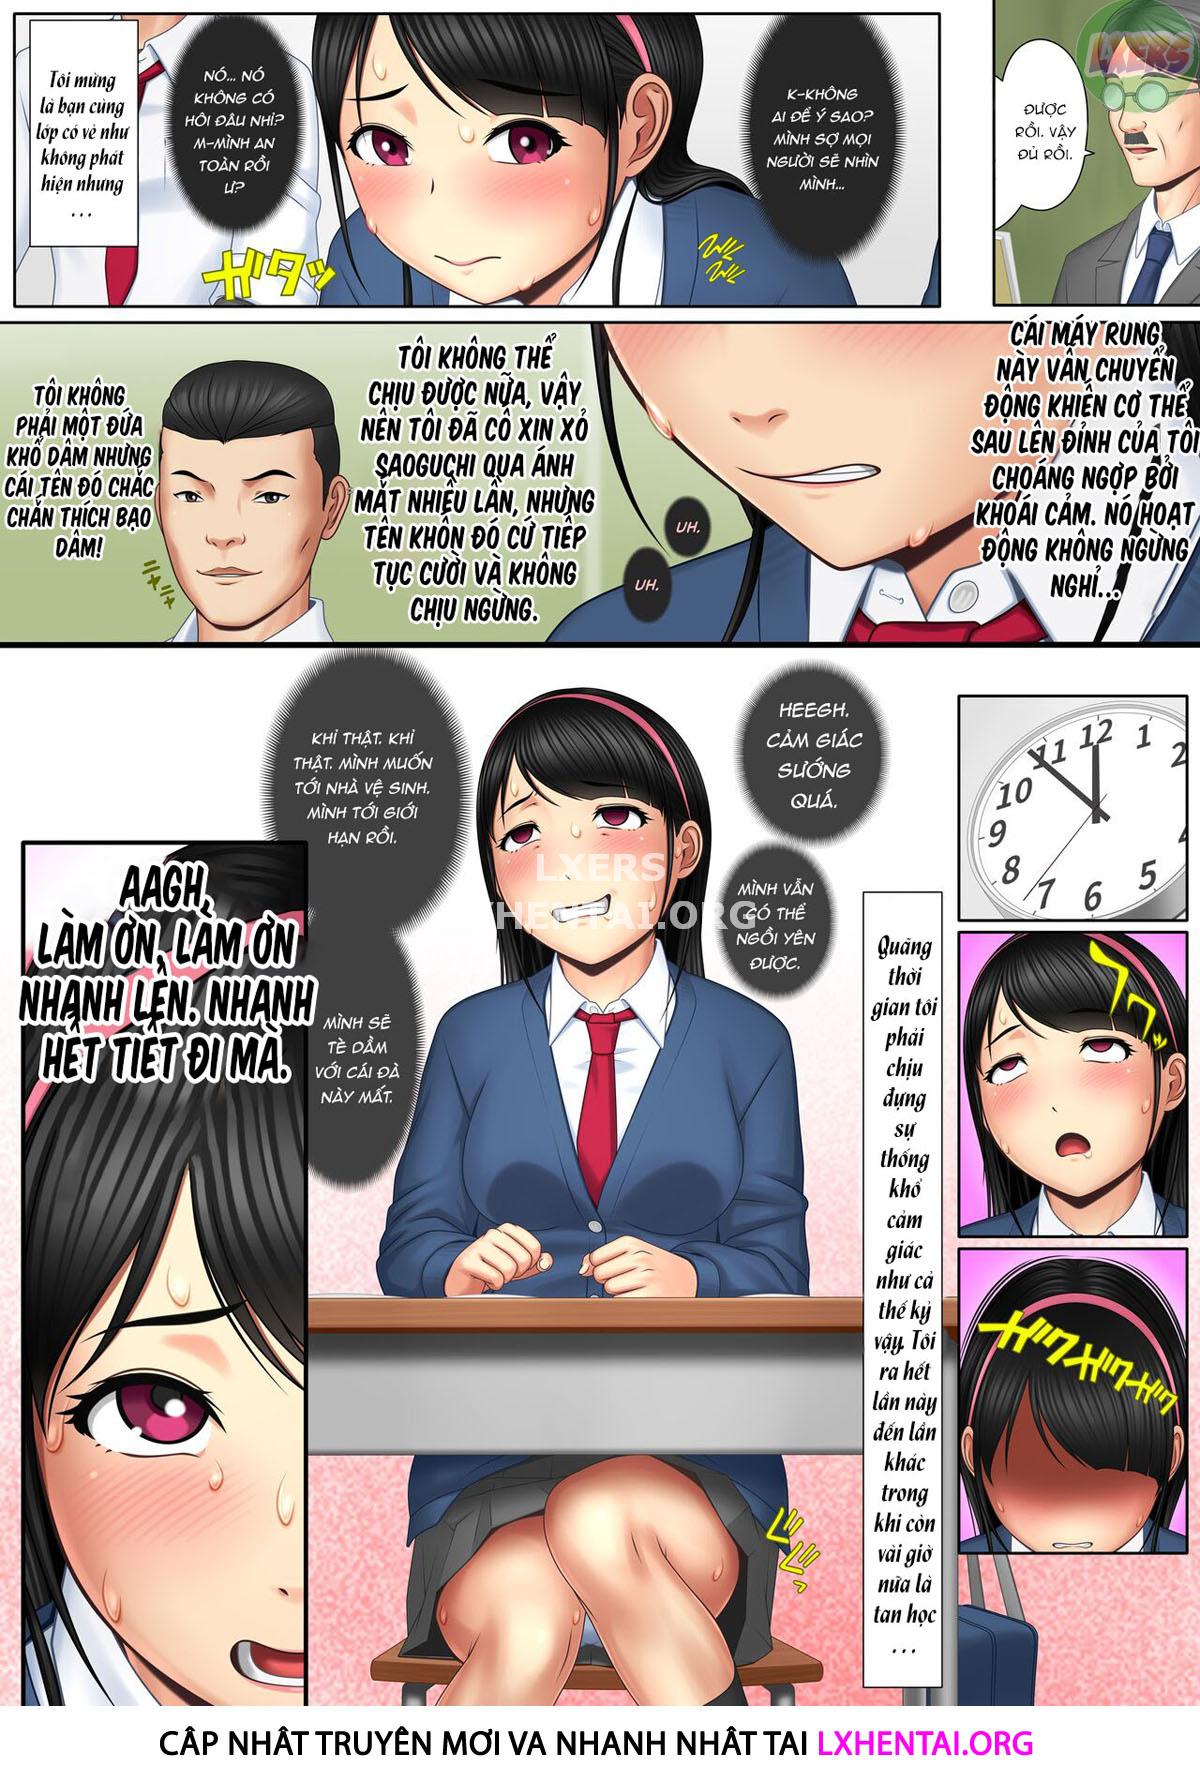 Xem ảnh Pleasure ≠ Boyfriend ~I Can't Believe Guys As Annoying As These Are Making Me Cum - Chapter 3 END - 42 - Hentai24h.Tv